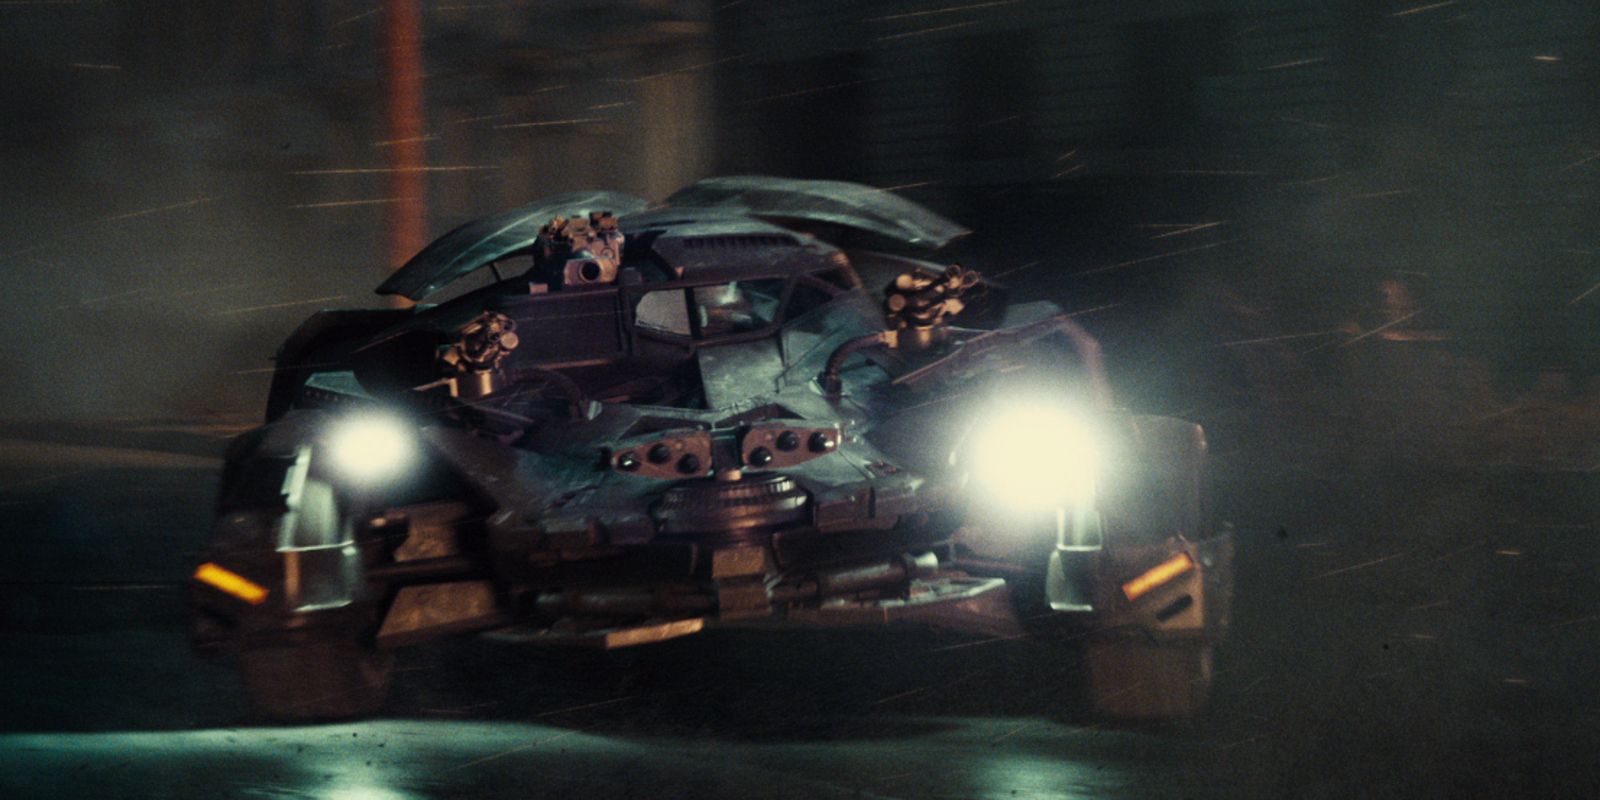 The Batmobile battling parademons in Zack Snyder's Justice League